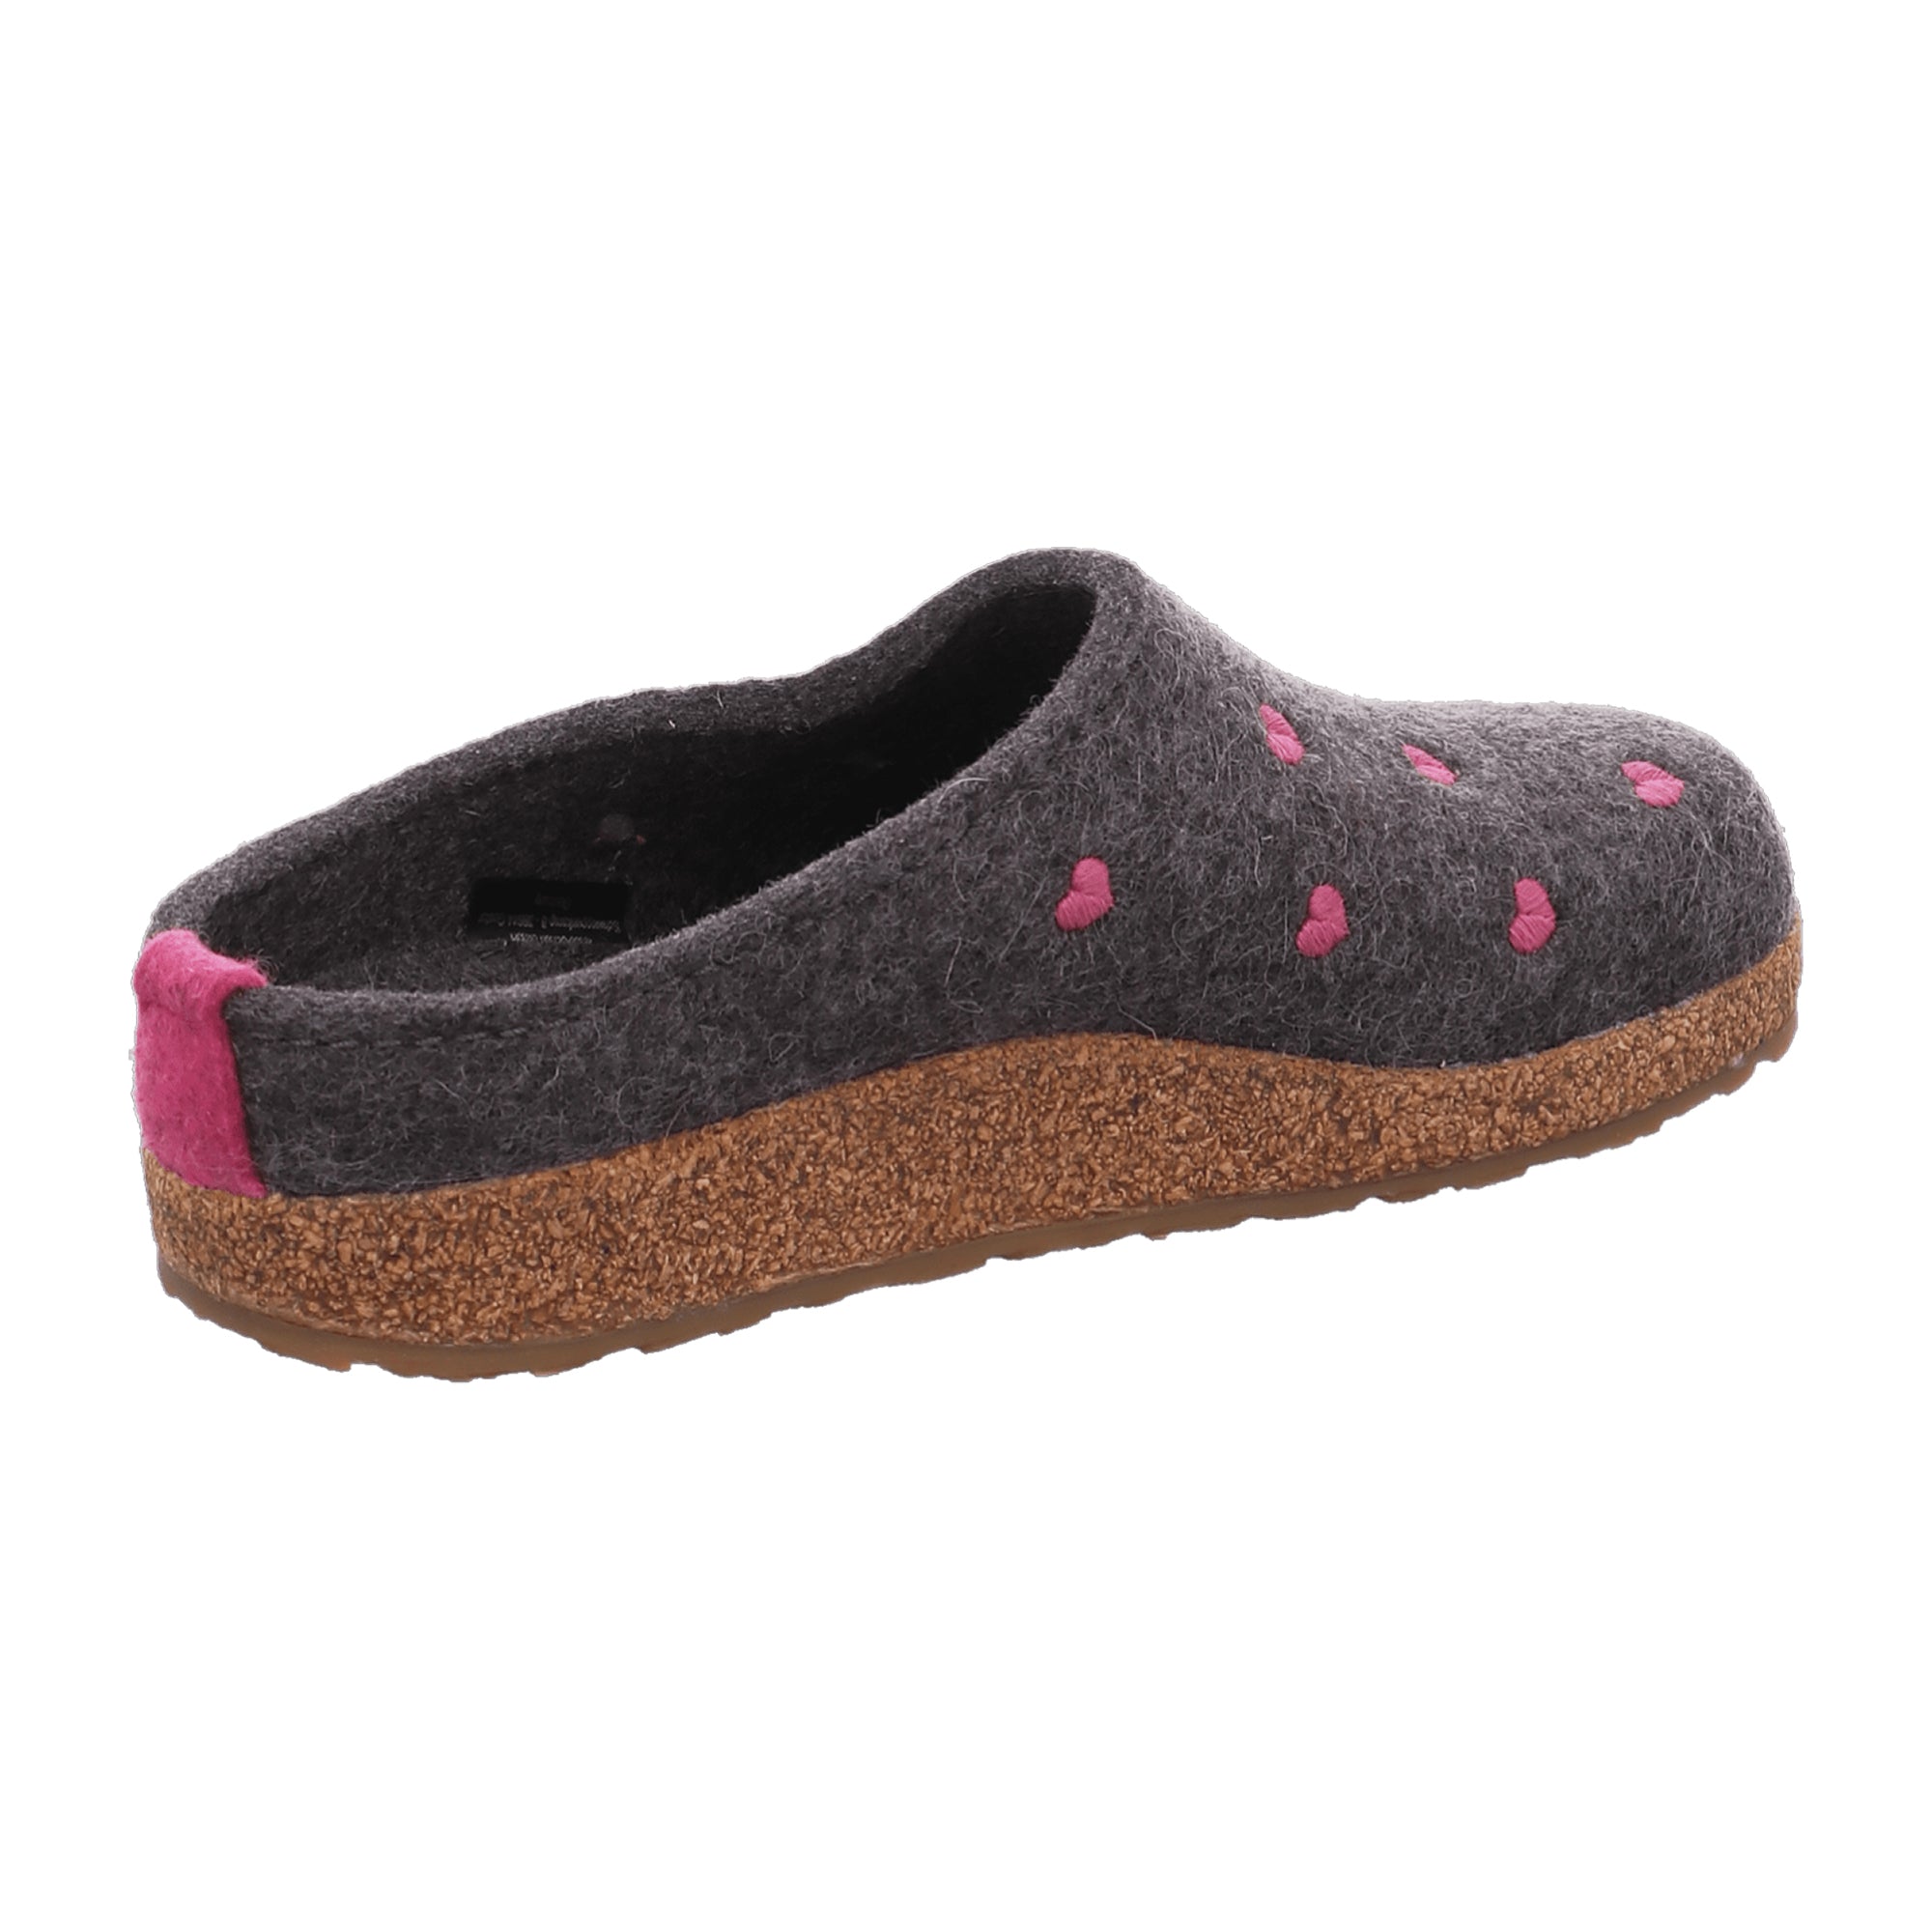 Haflinger Grizzly Cuoricino Women's Clogs, Grey - Stylish & Durable Comfort